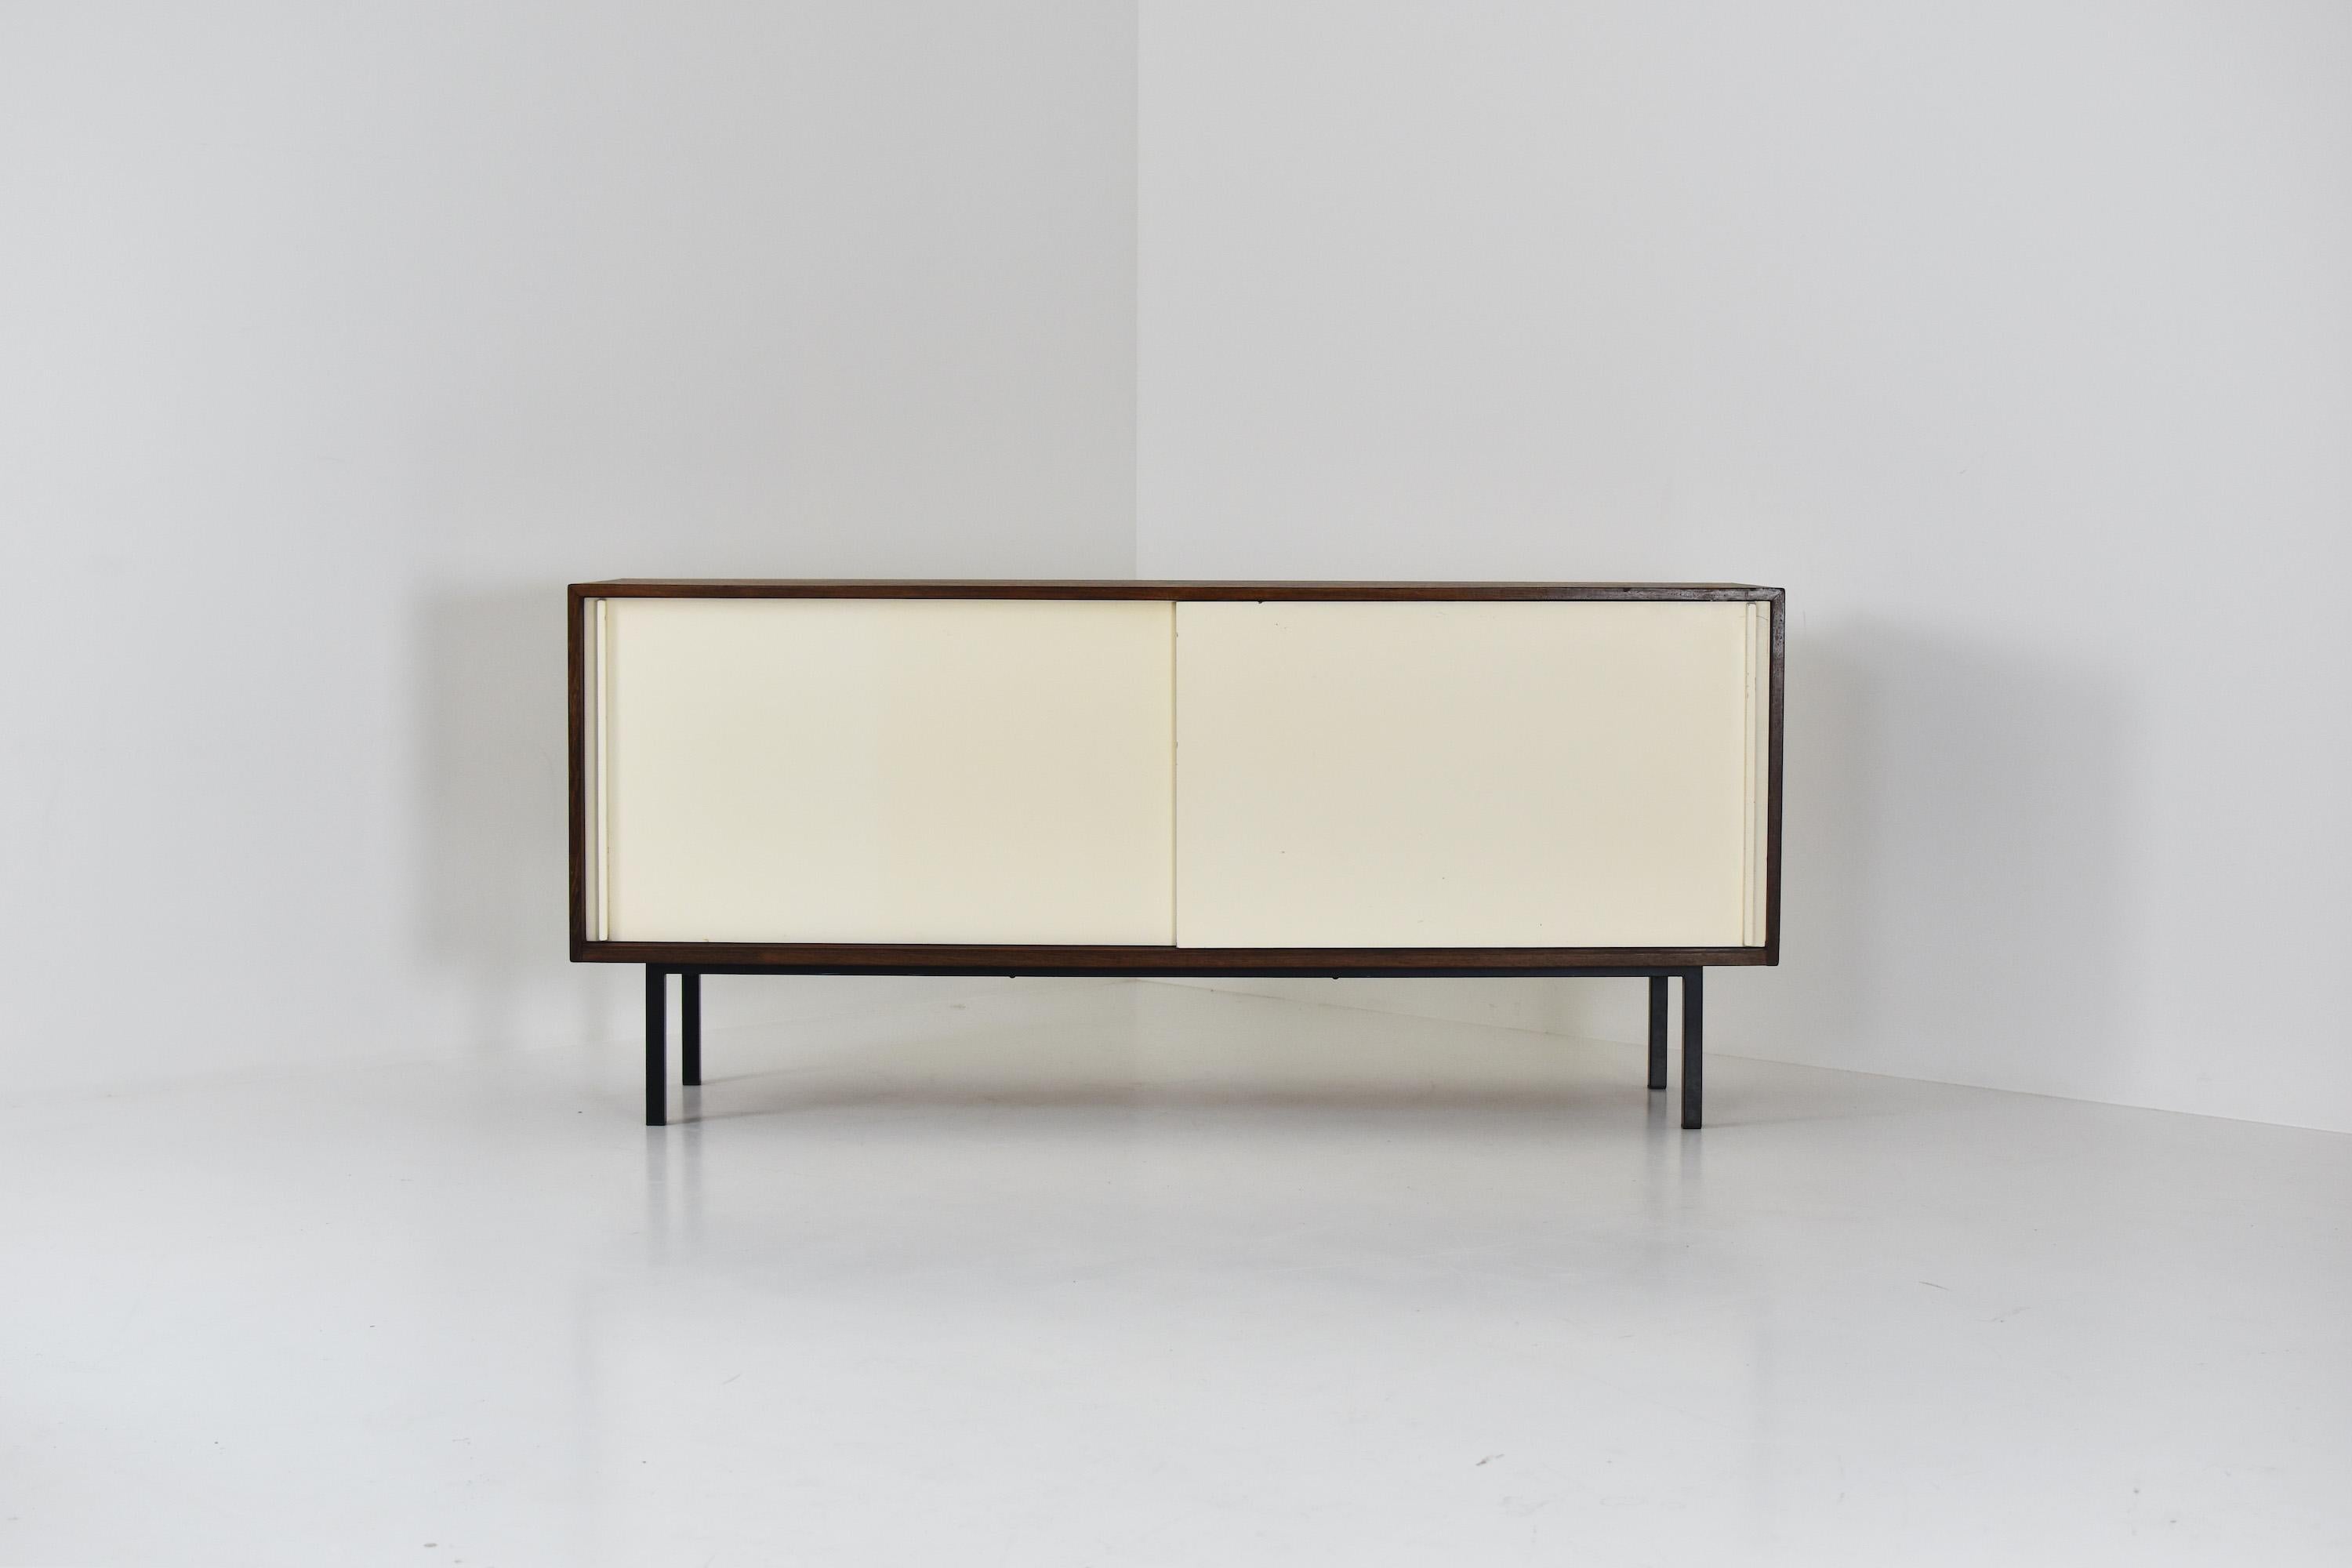 Modernist sideboard designed by Martin Visser and Jos Manders for ‘t Spectrum, The Netherlands, 1958. This is Model No. ‘KW87’ made out of wenge, white painted sliding doors and a black lacquered steel frame. The doors covering a series of three